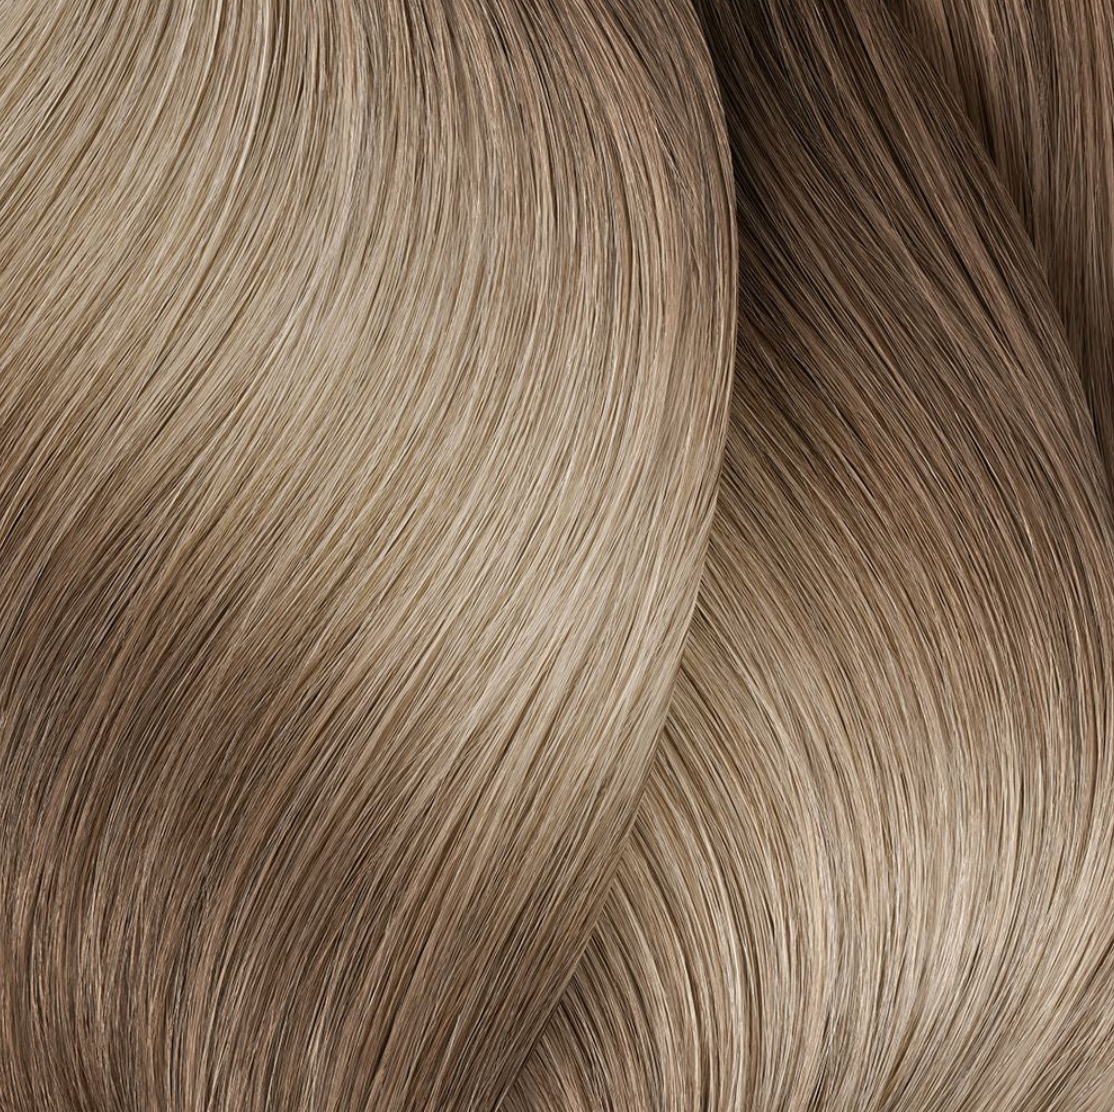 a close up view of a light brown hair